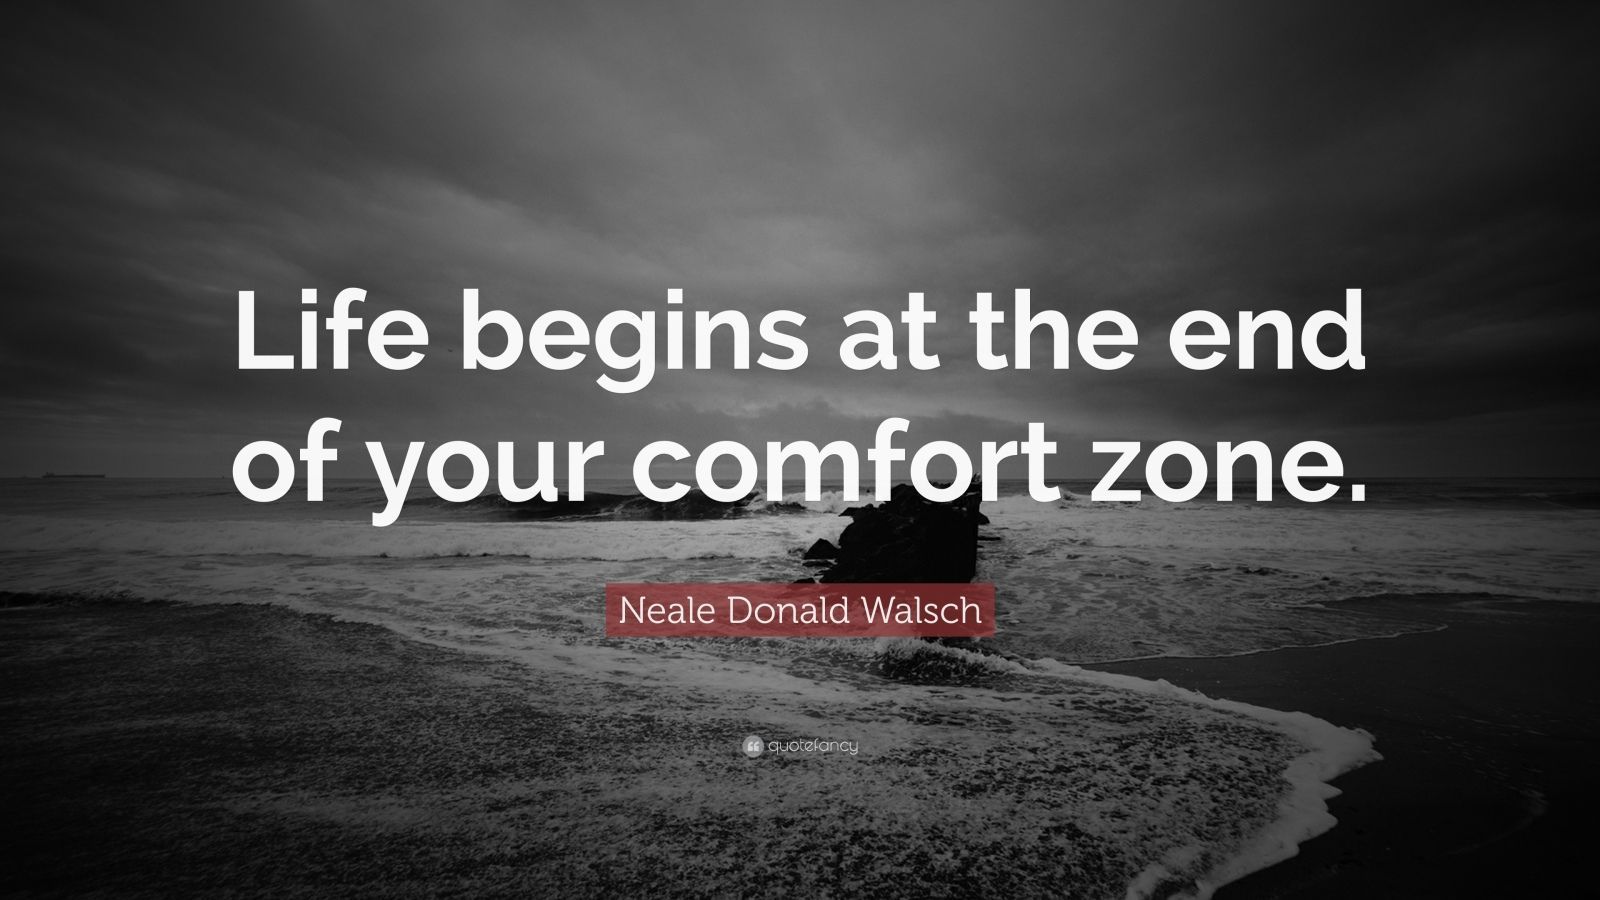 Motivational Quotes: “Life begins at the end of your comfort z. Inspirational quotes wallpaper, Motivational quotes for working out, Motivational quotes for life